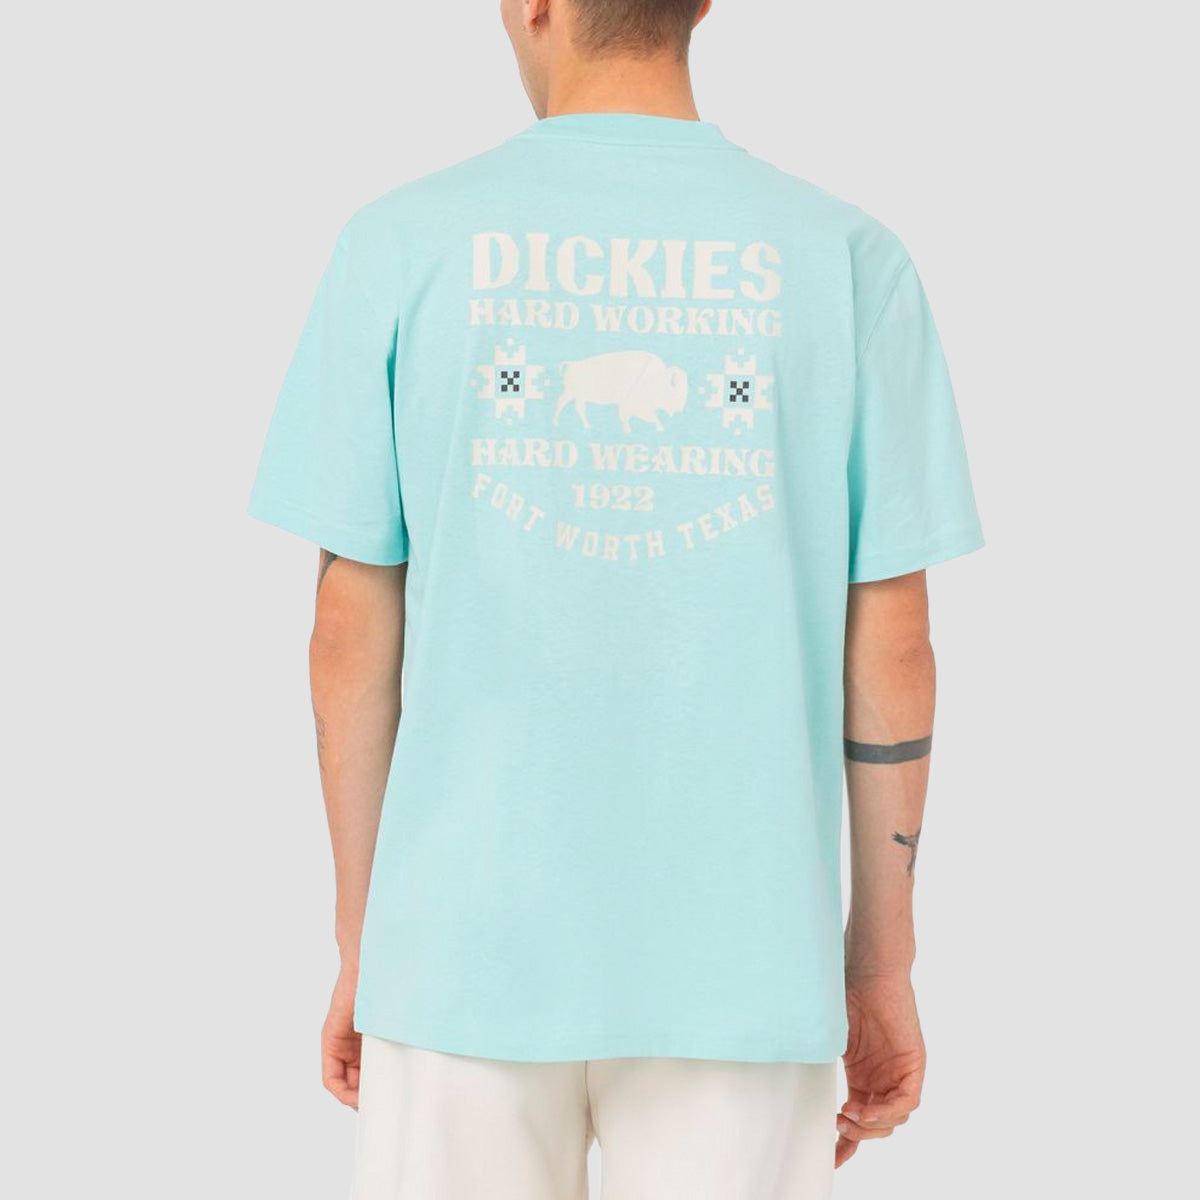 Dickies Hays T-Shirt Pastle Turquoise